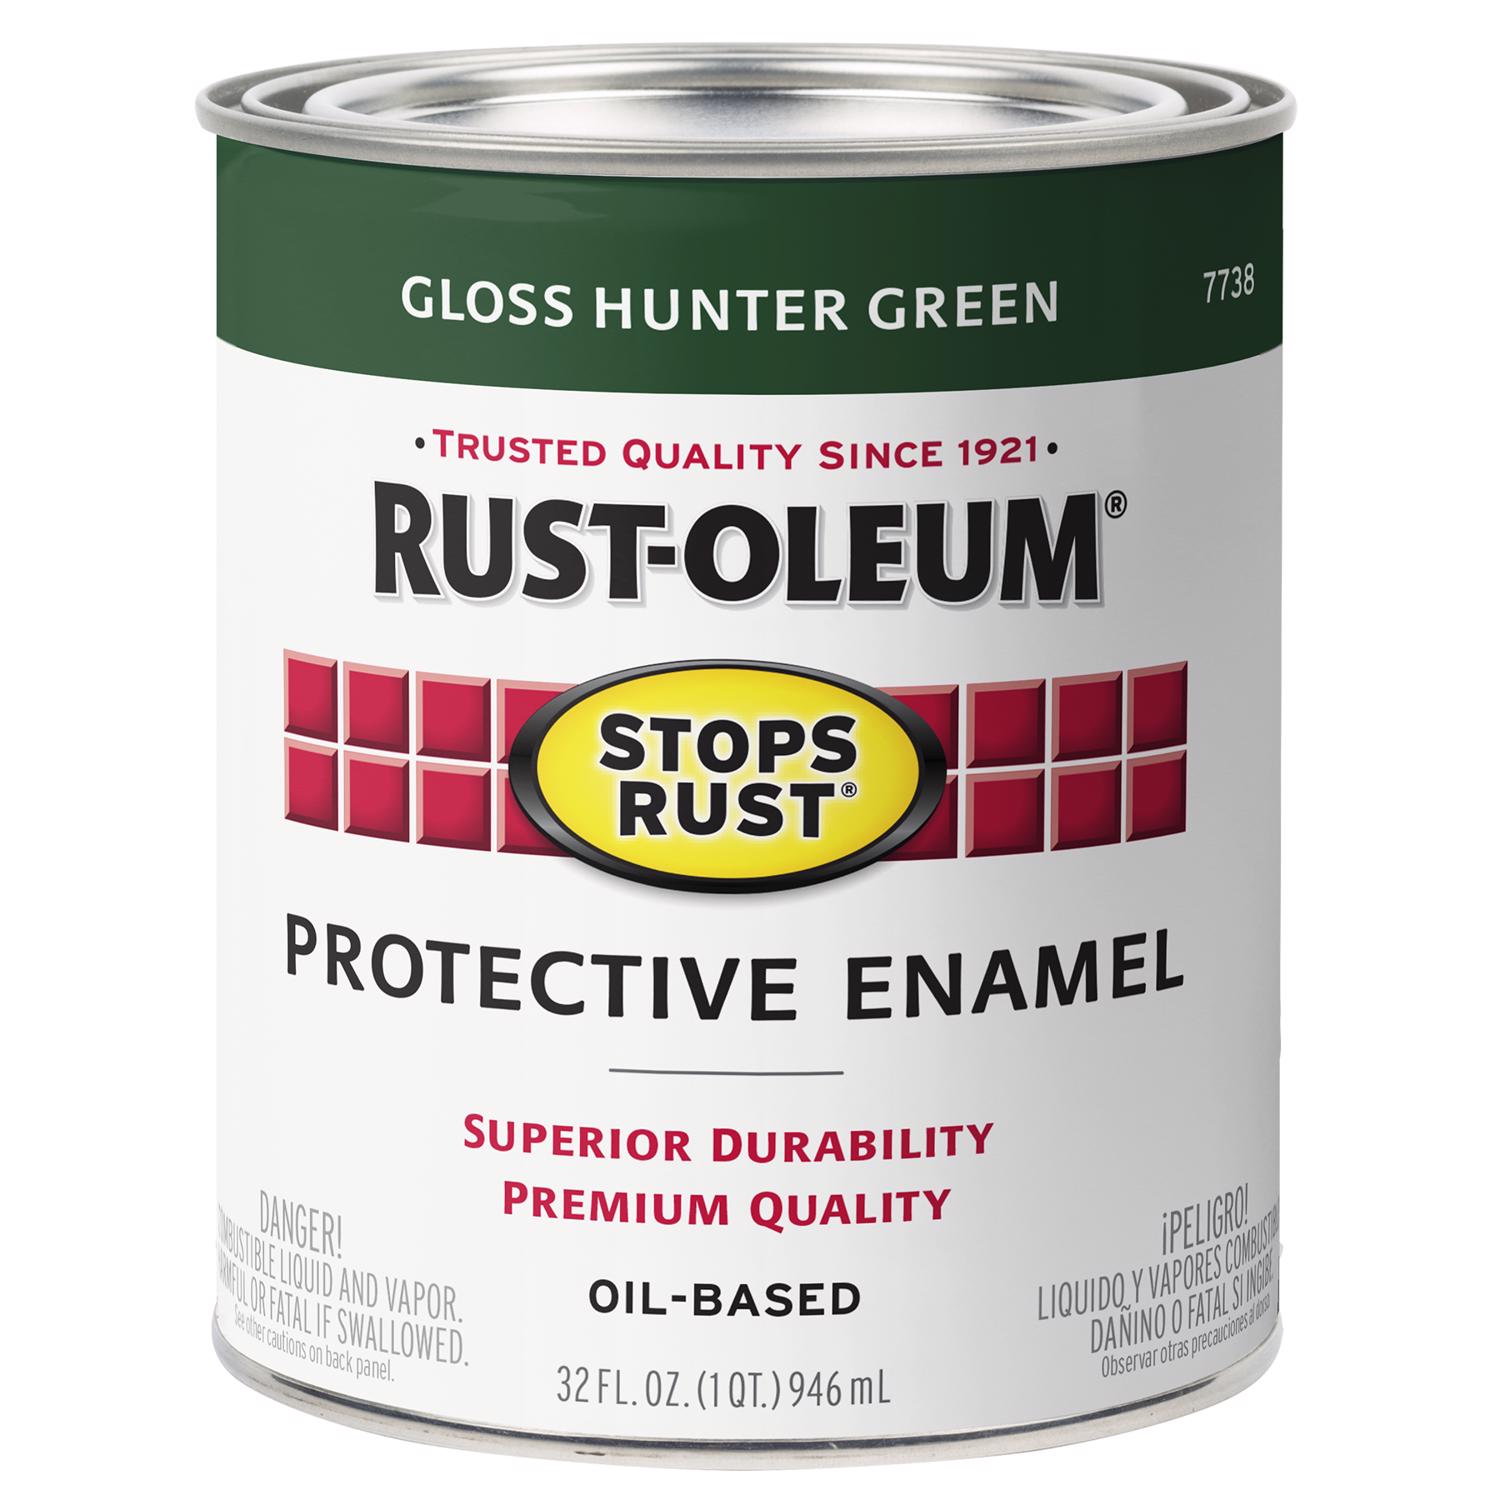 Rust-Oleum Stops Rust Indoor and Outdoor Gloss Hunter Green Oil-Based Protective Paint 1 qt